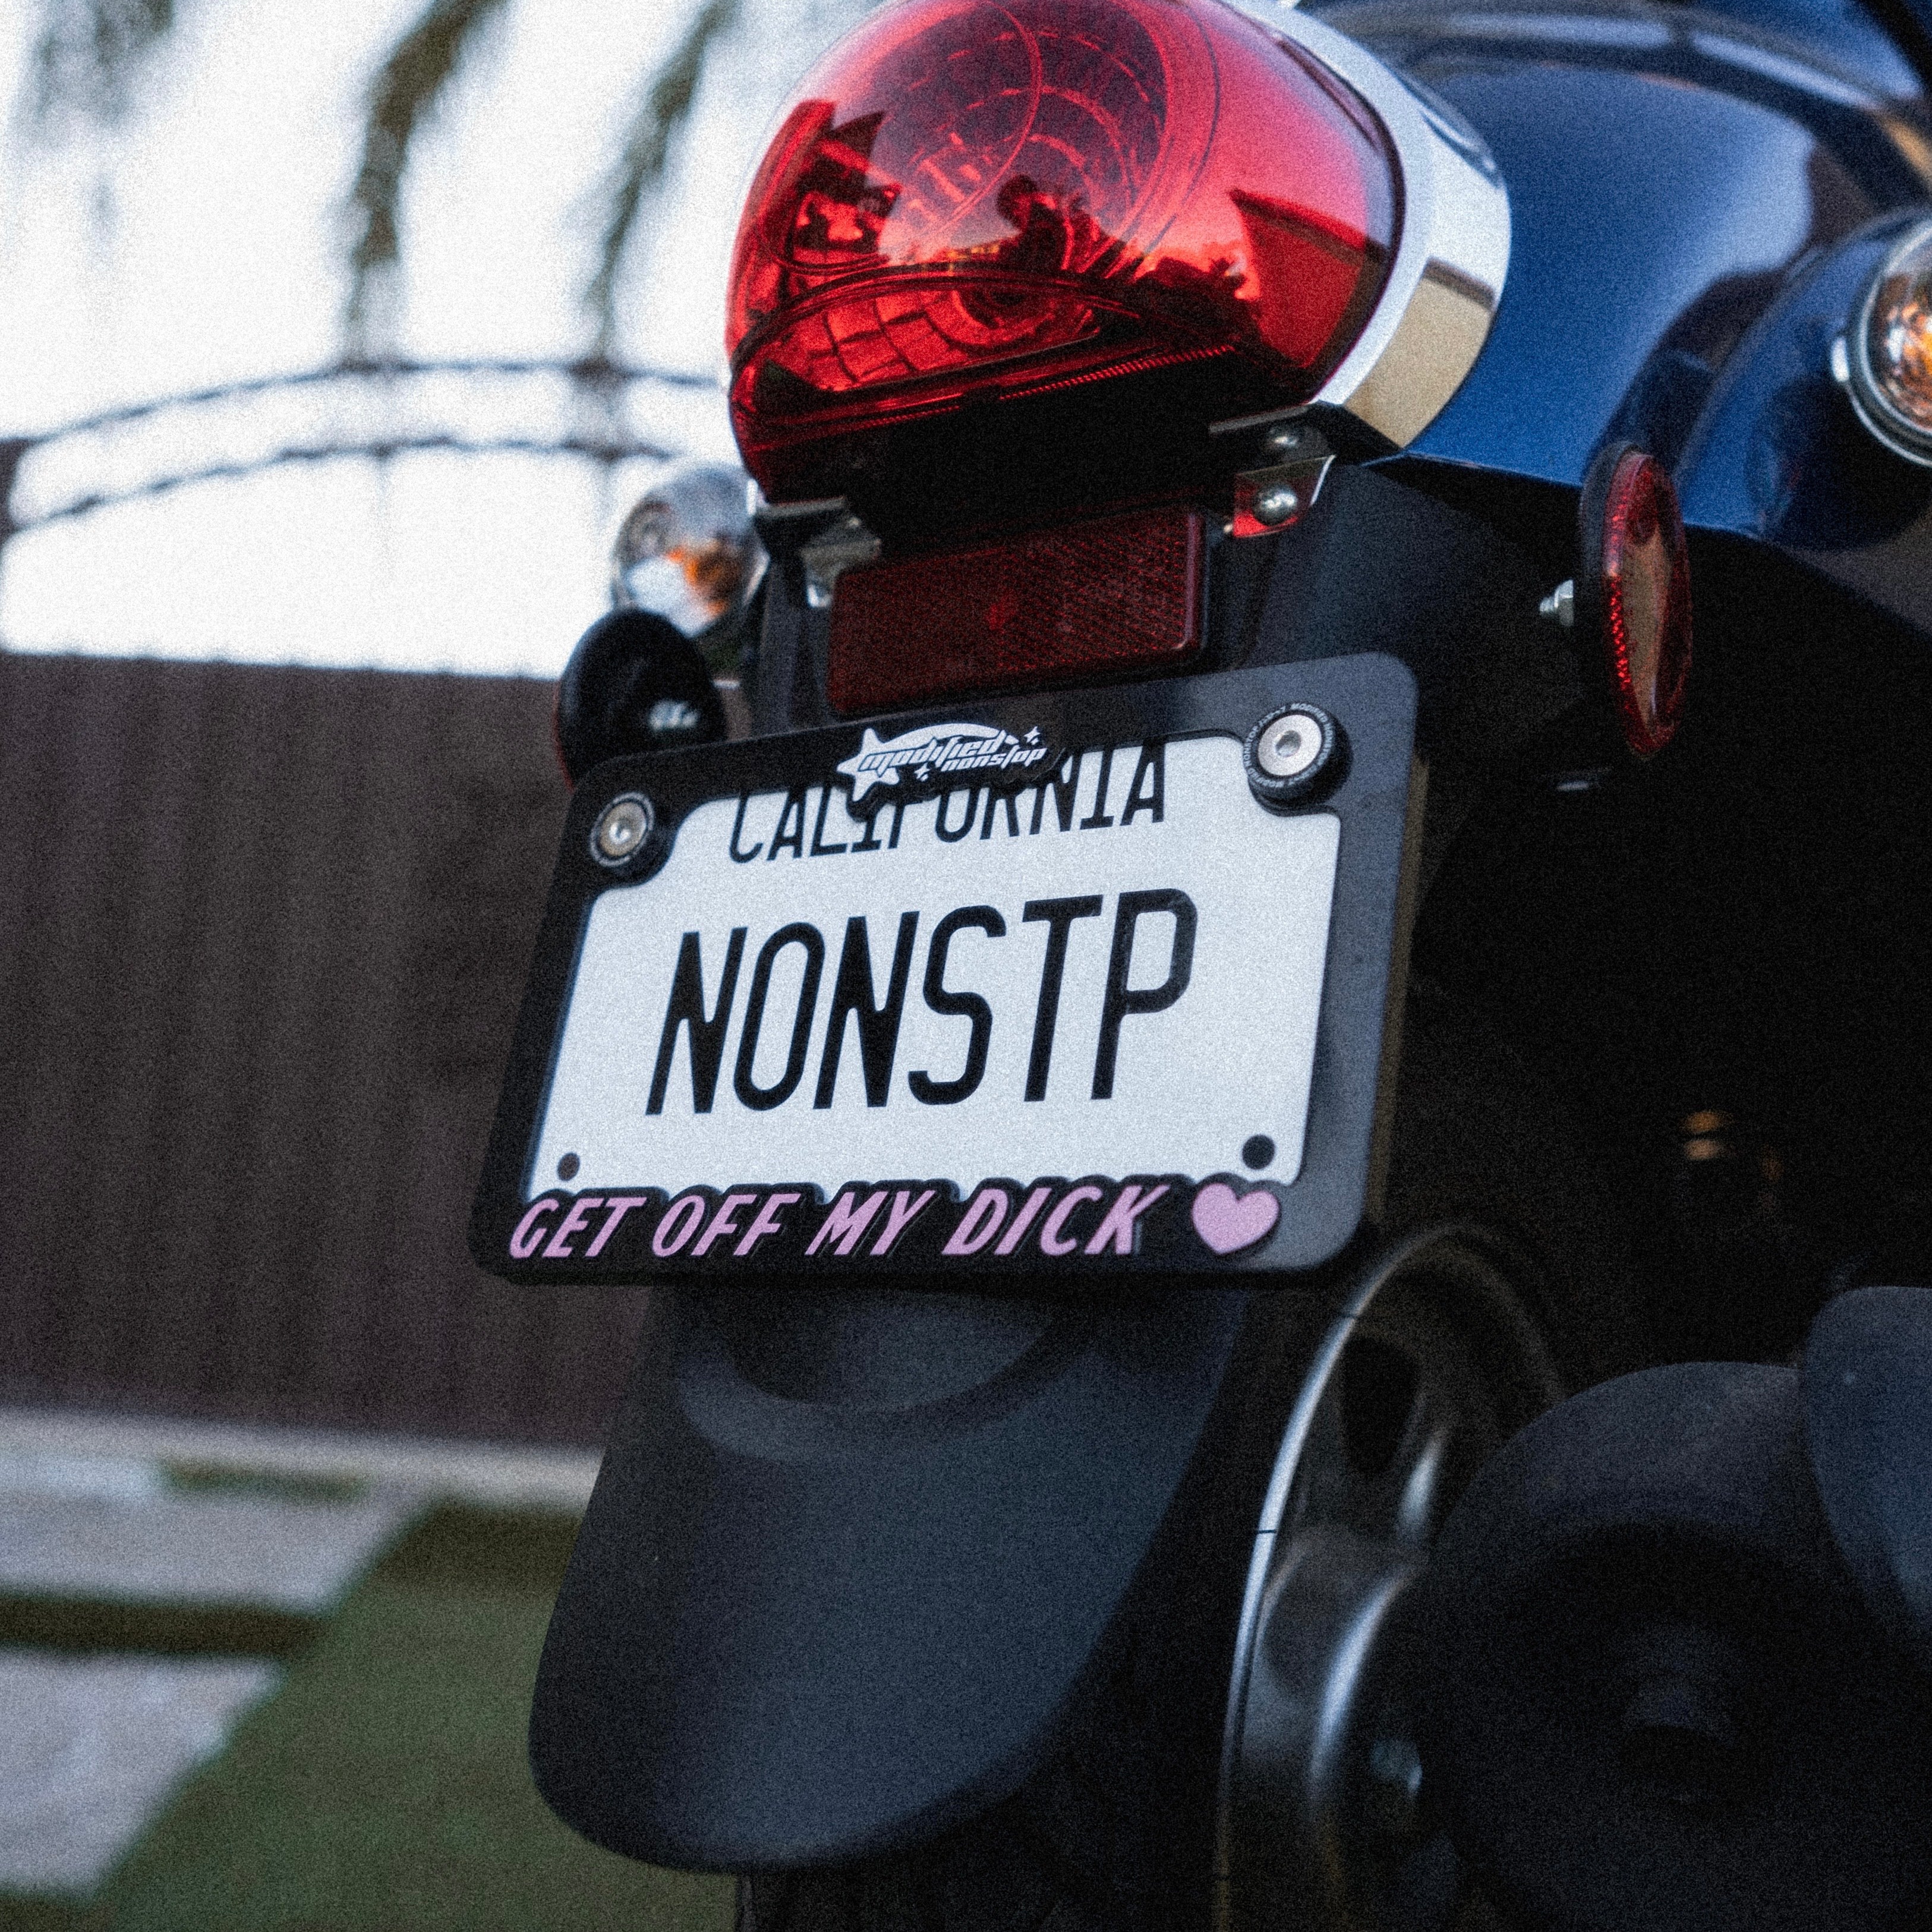 Get Off My Dick Motorcycle License Plate Frame